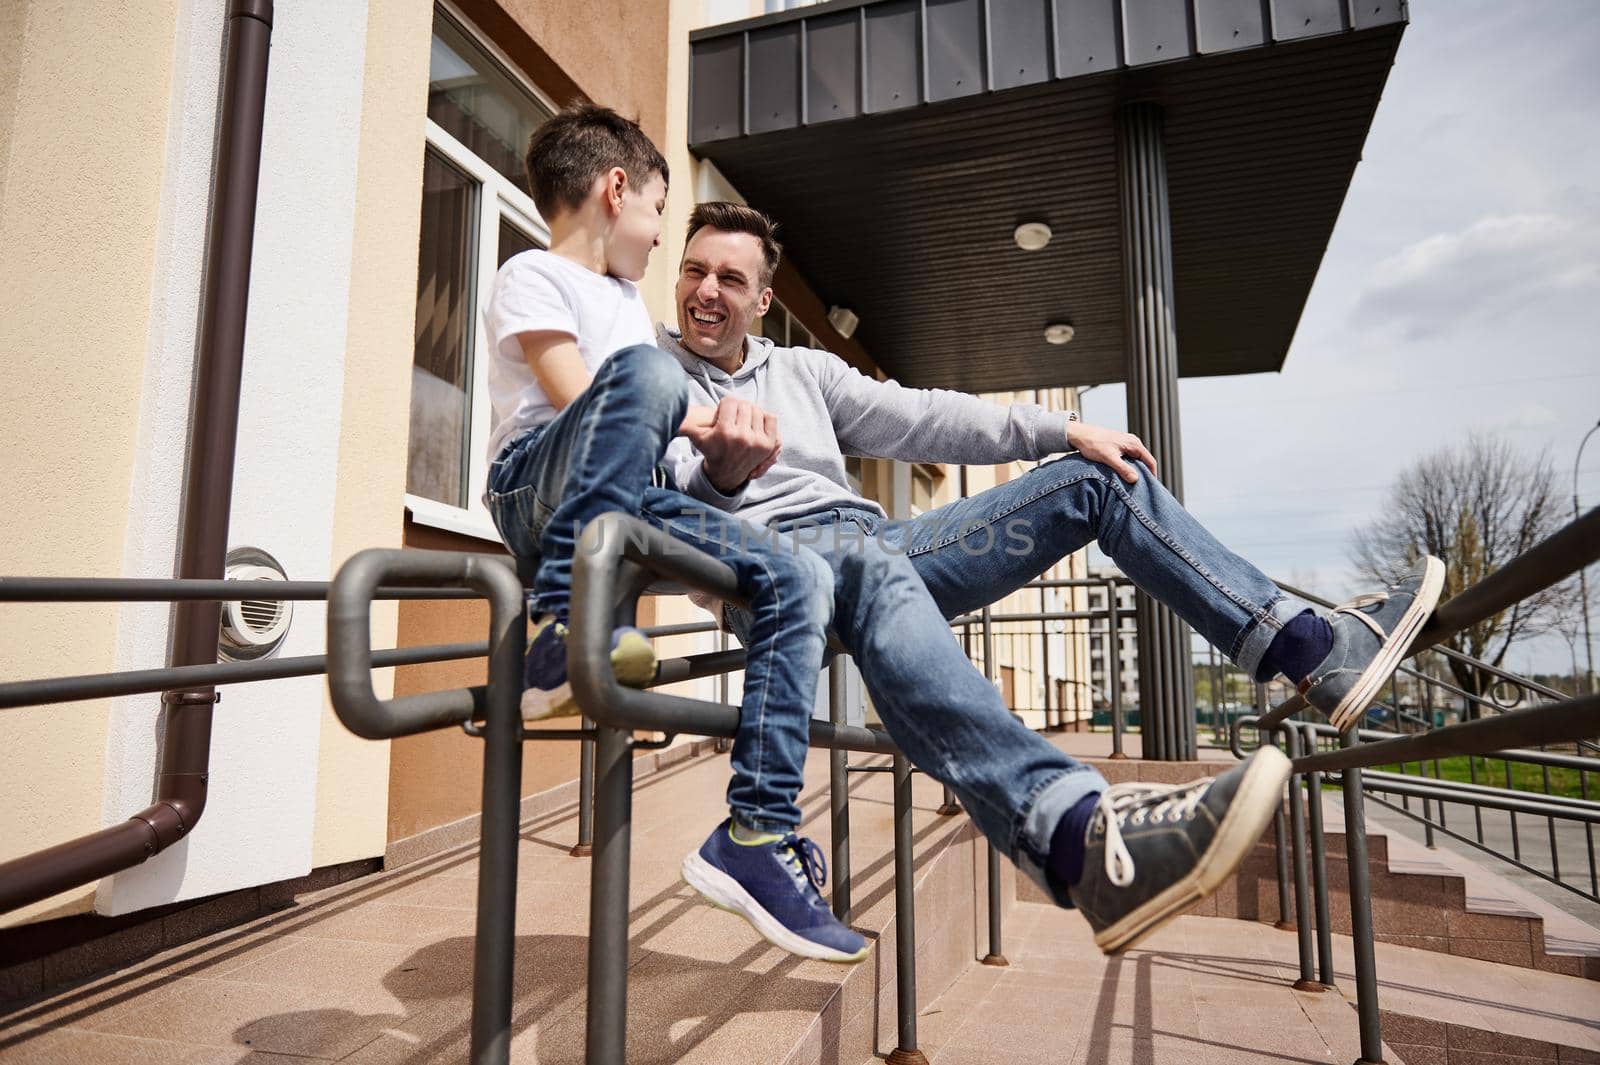 Handsome caucasian man laughing with his adorable son while sitting on a handrail outdoors